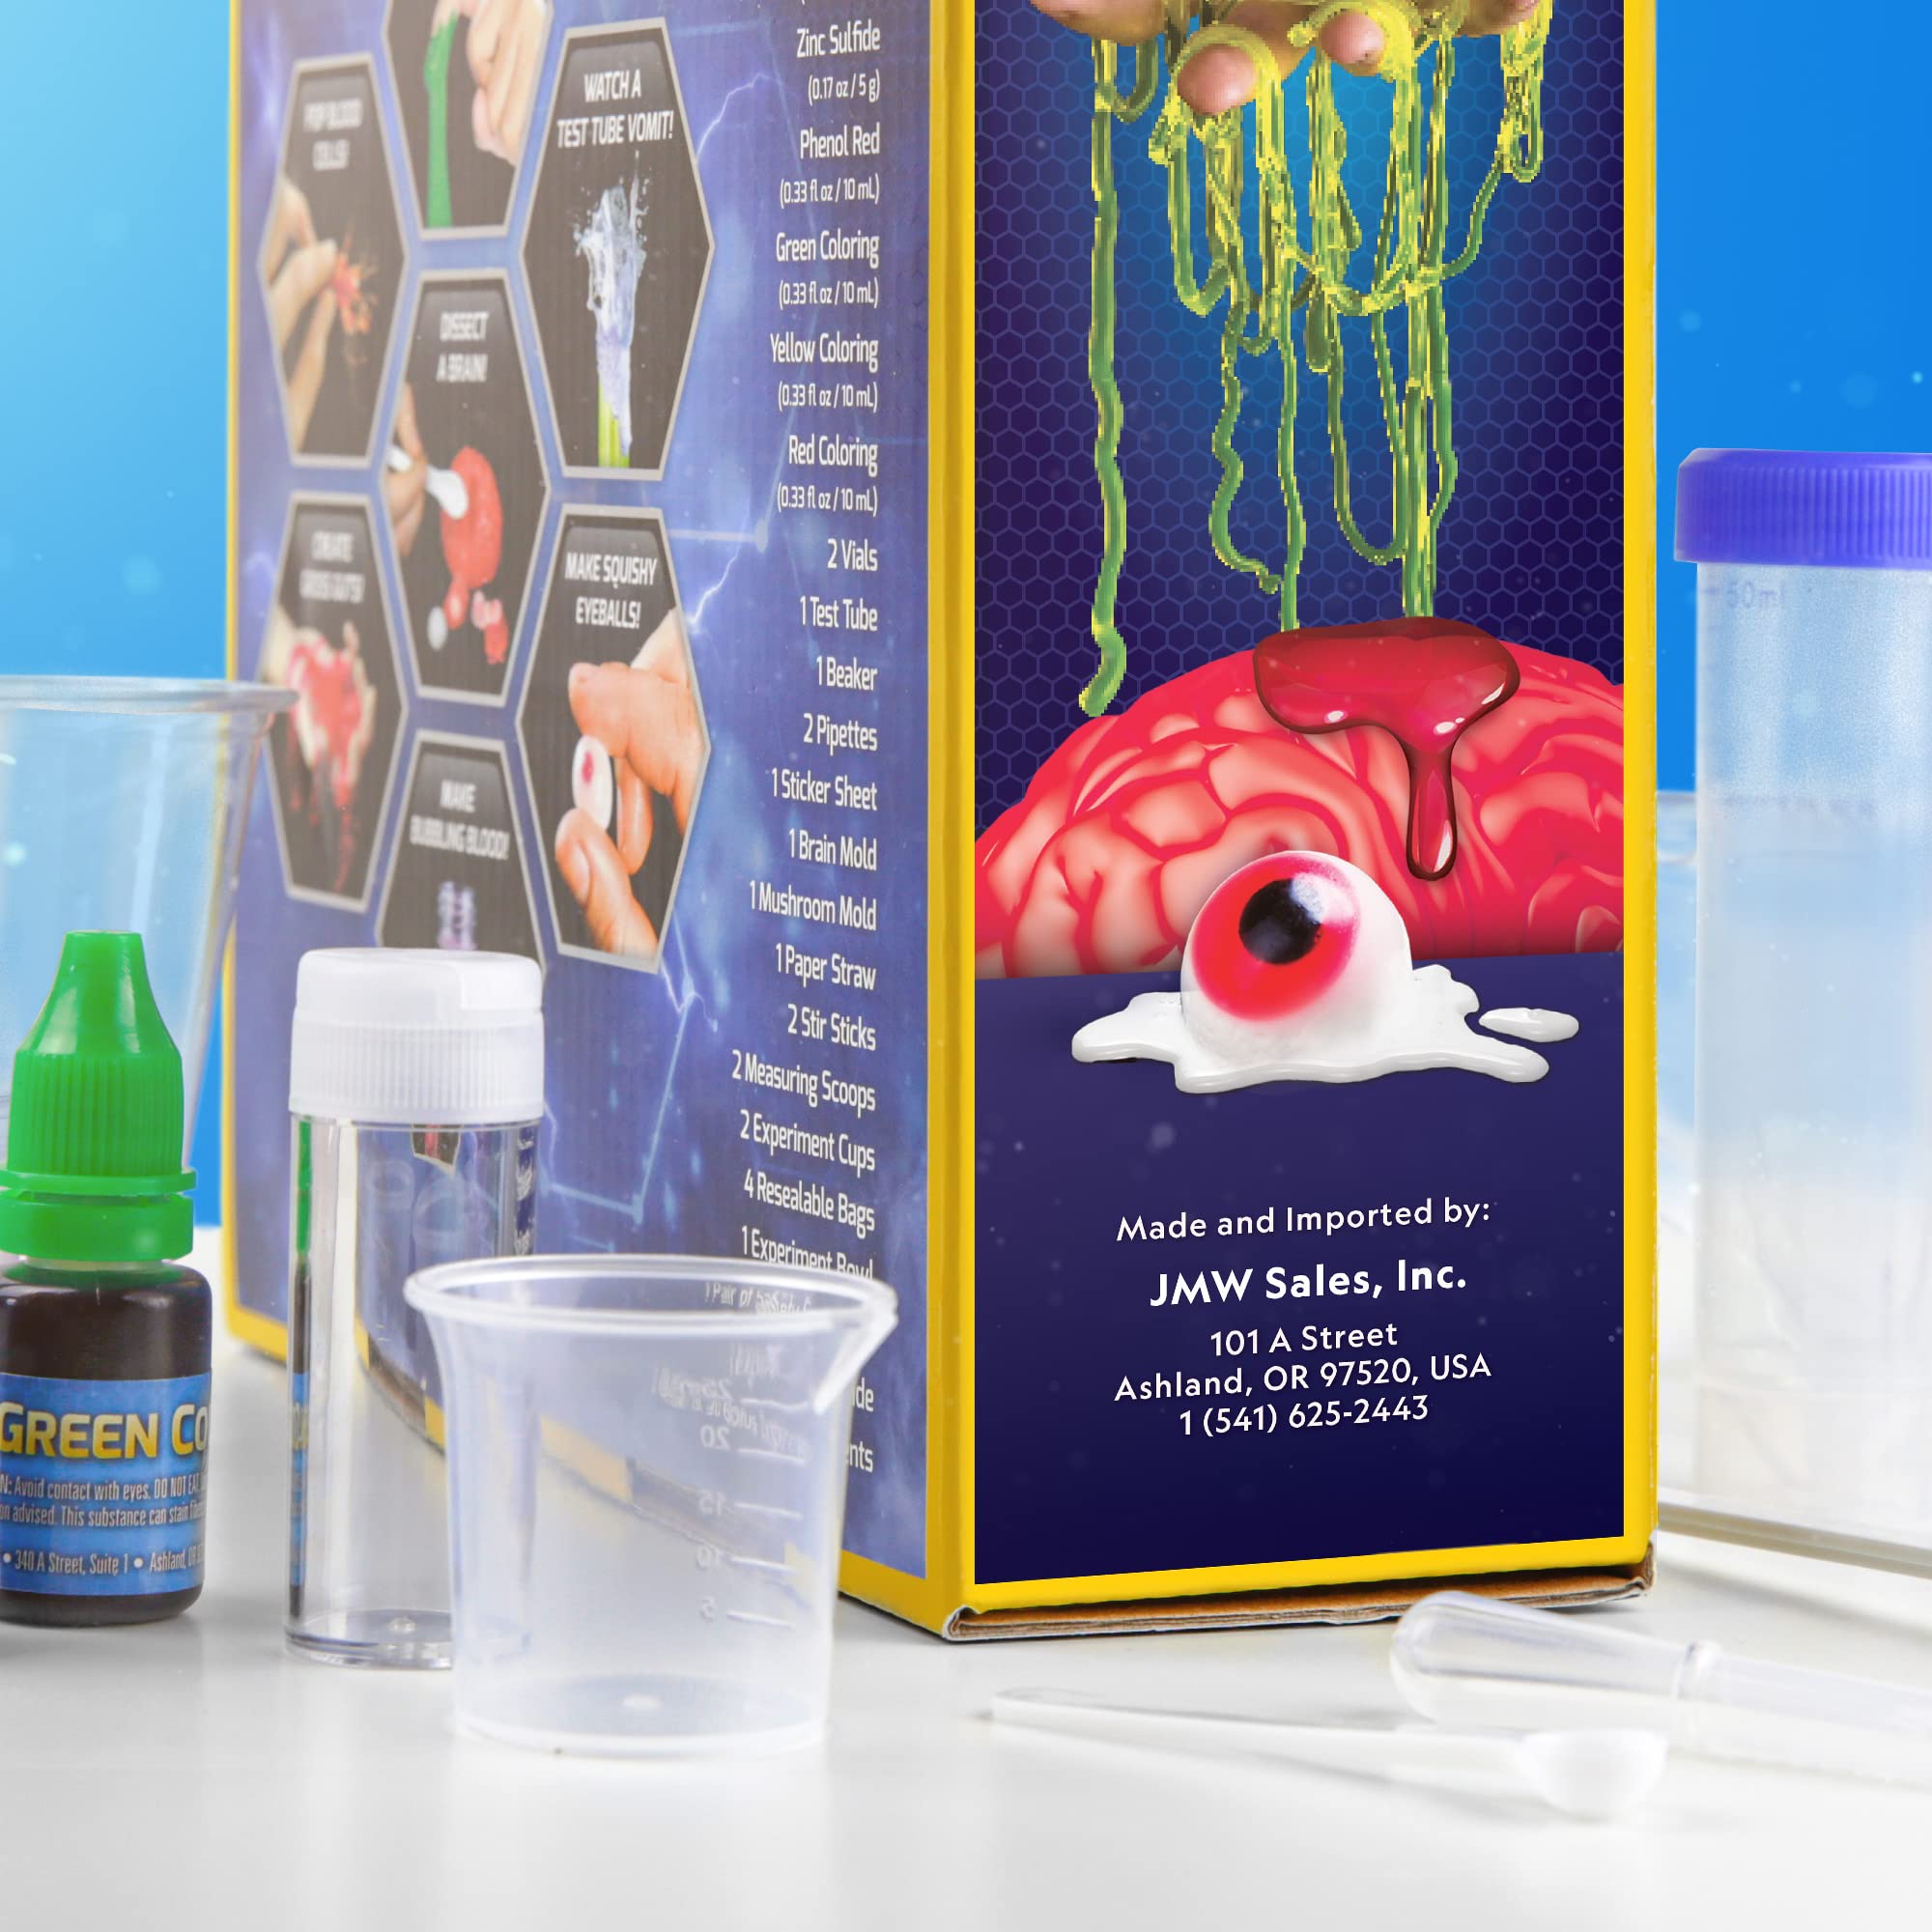 NATIONAL GEOGRAPHIC Gross Science Kit - 45 Gross Science Experiments- Dissect a Brain, Make Glowing Slime Worms, Science Kit for Kids 8-12, STEM Project Gifts for Boys and Girls (Amazon Exclusive)